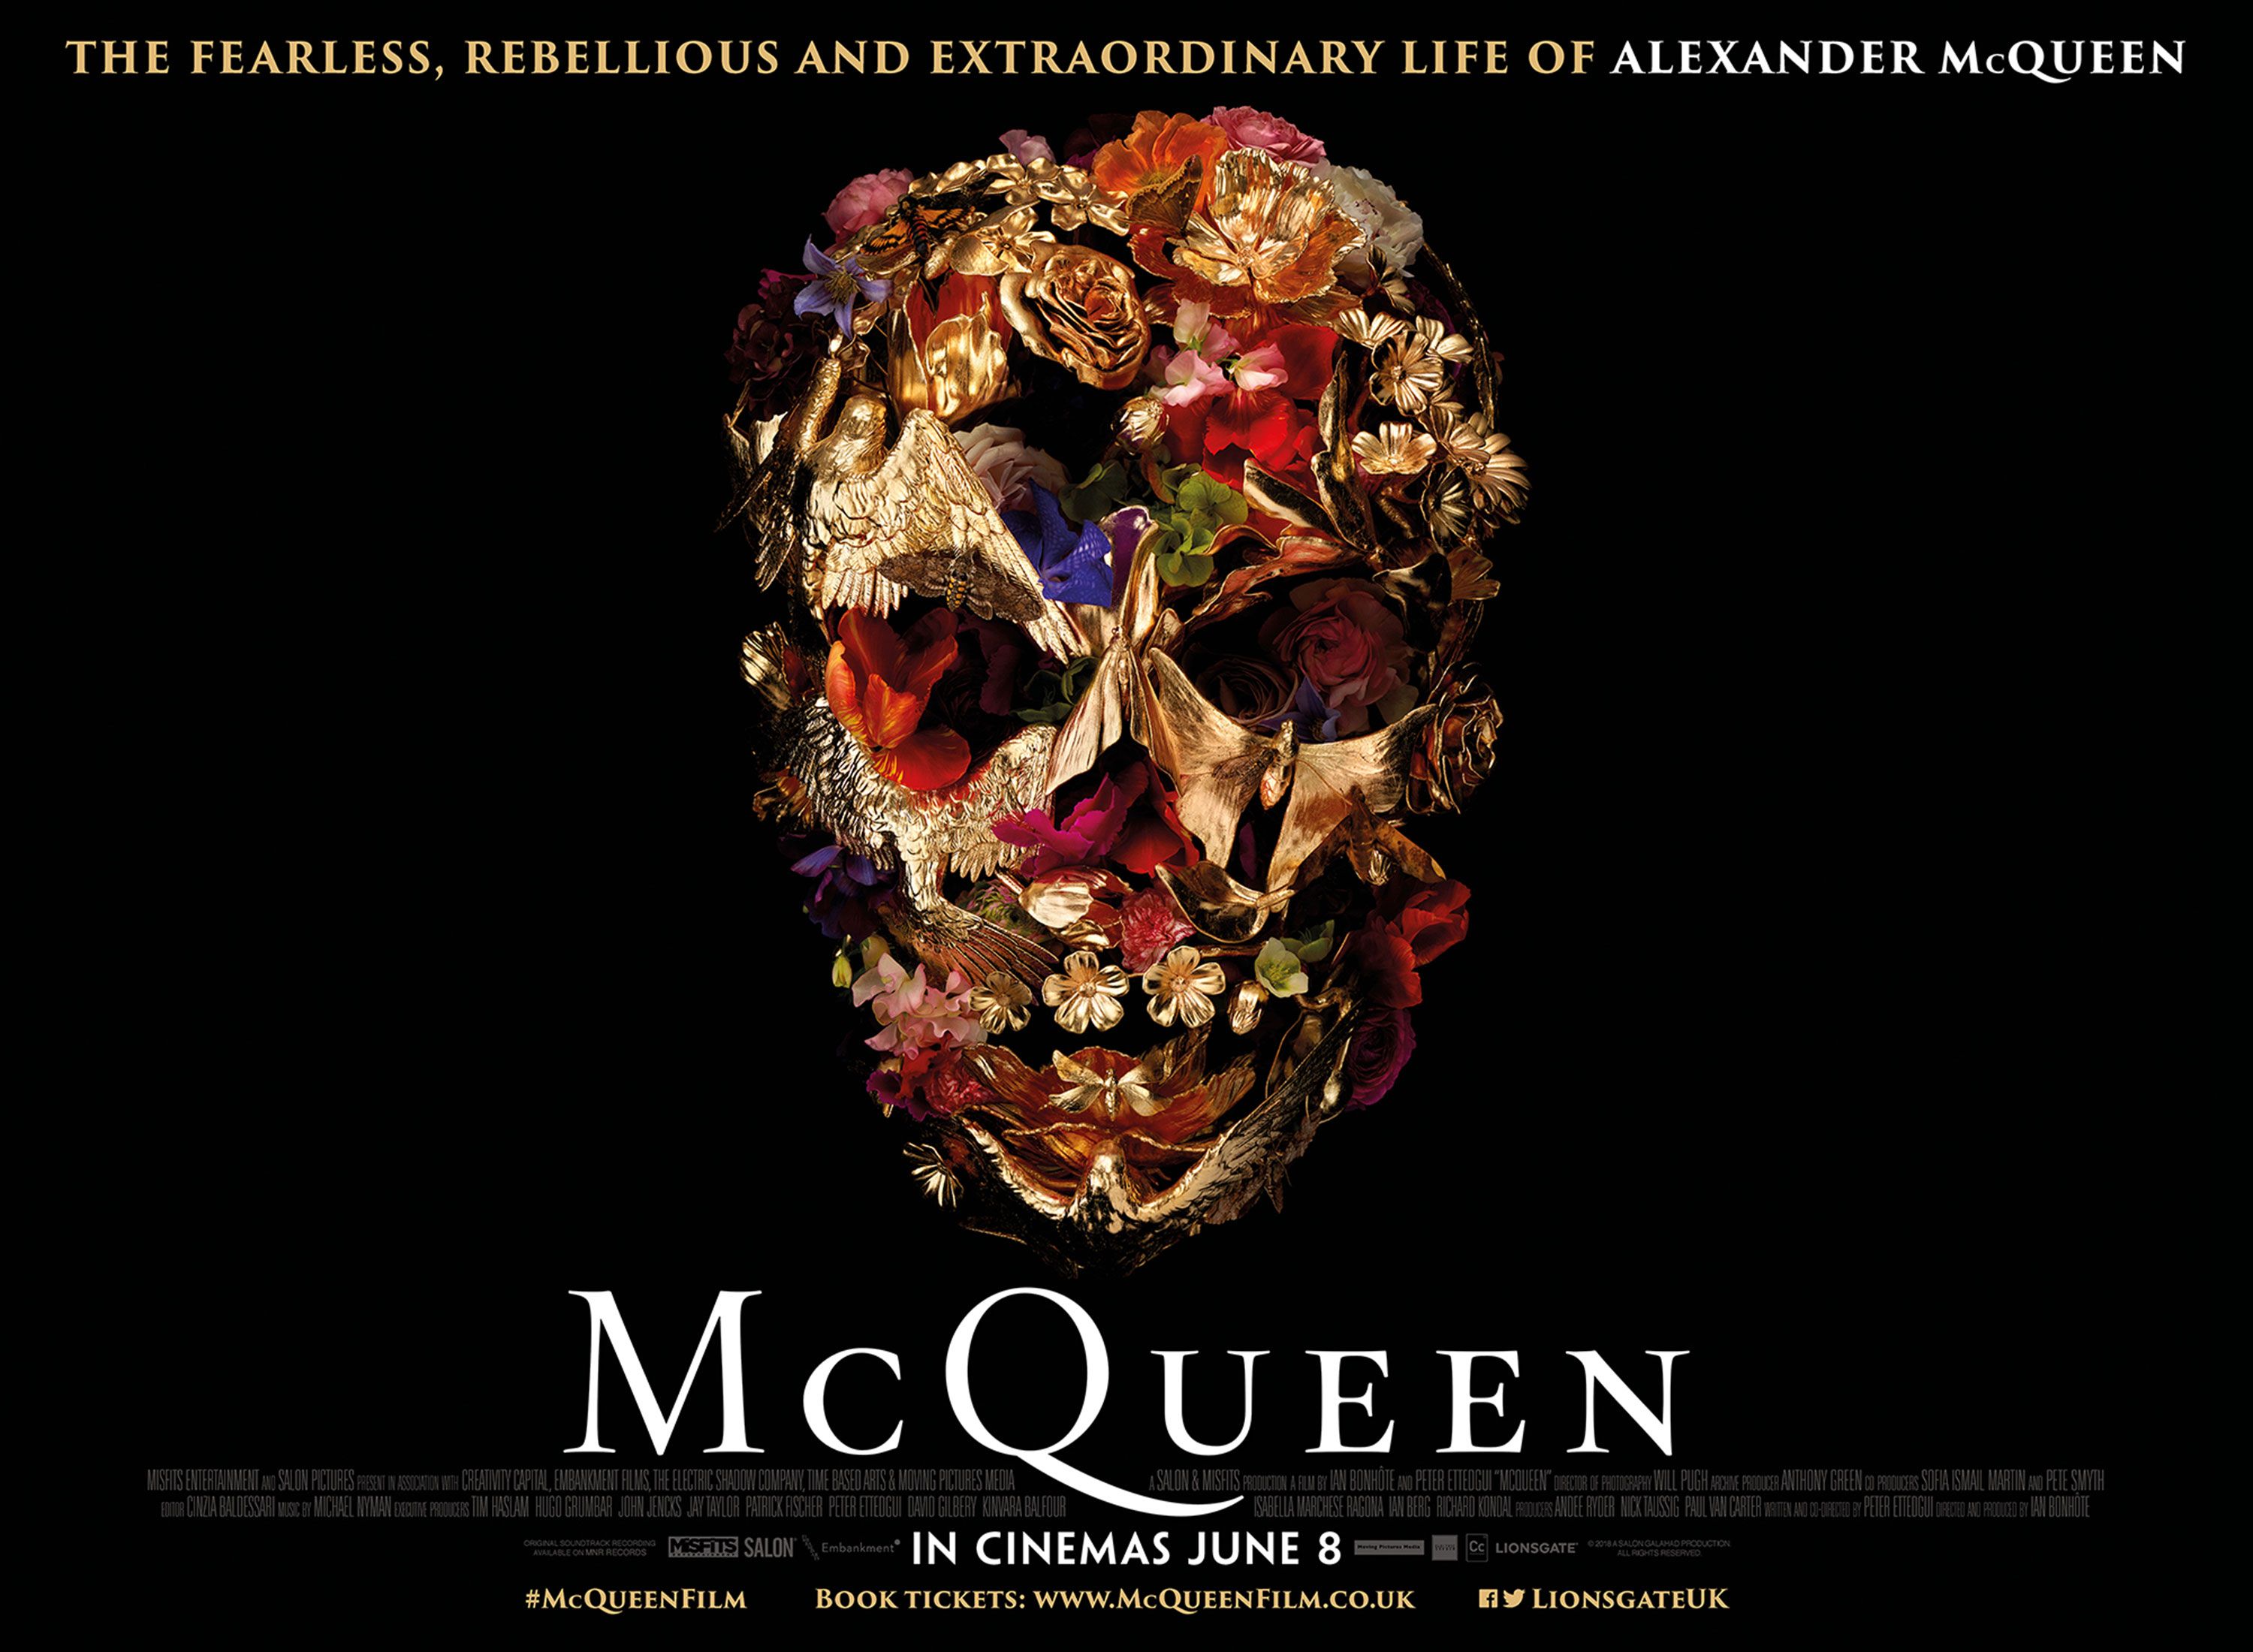 Get a First Look at the New Alexander McQueen Documentary